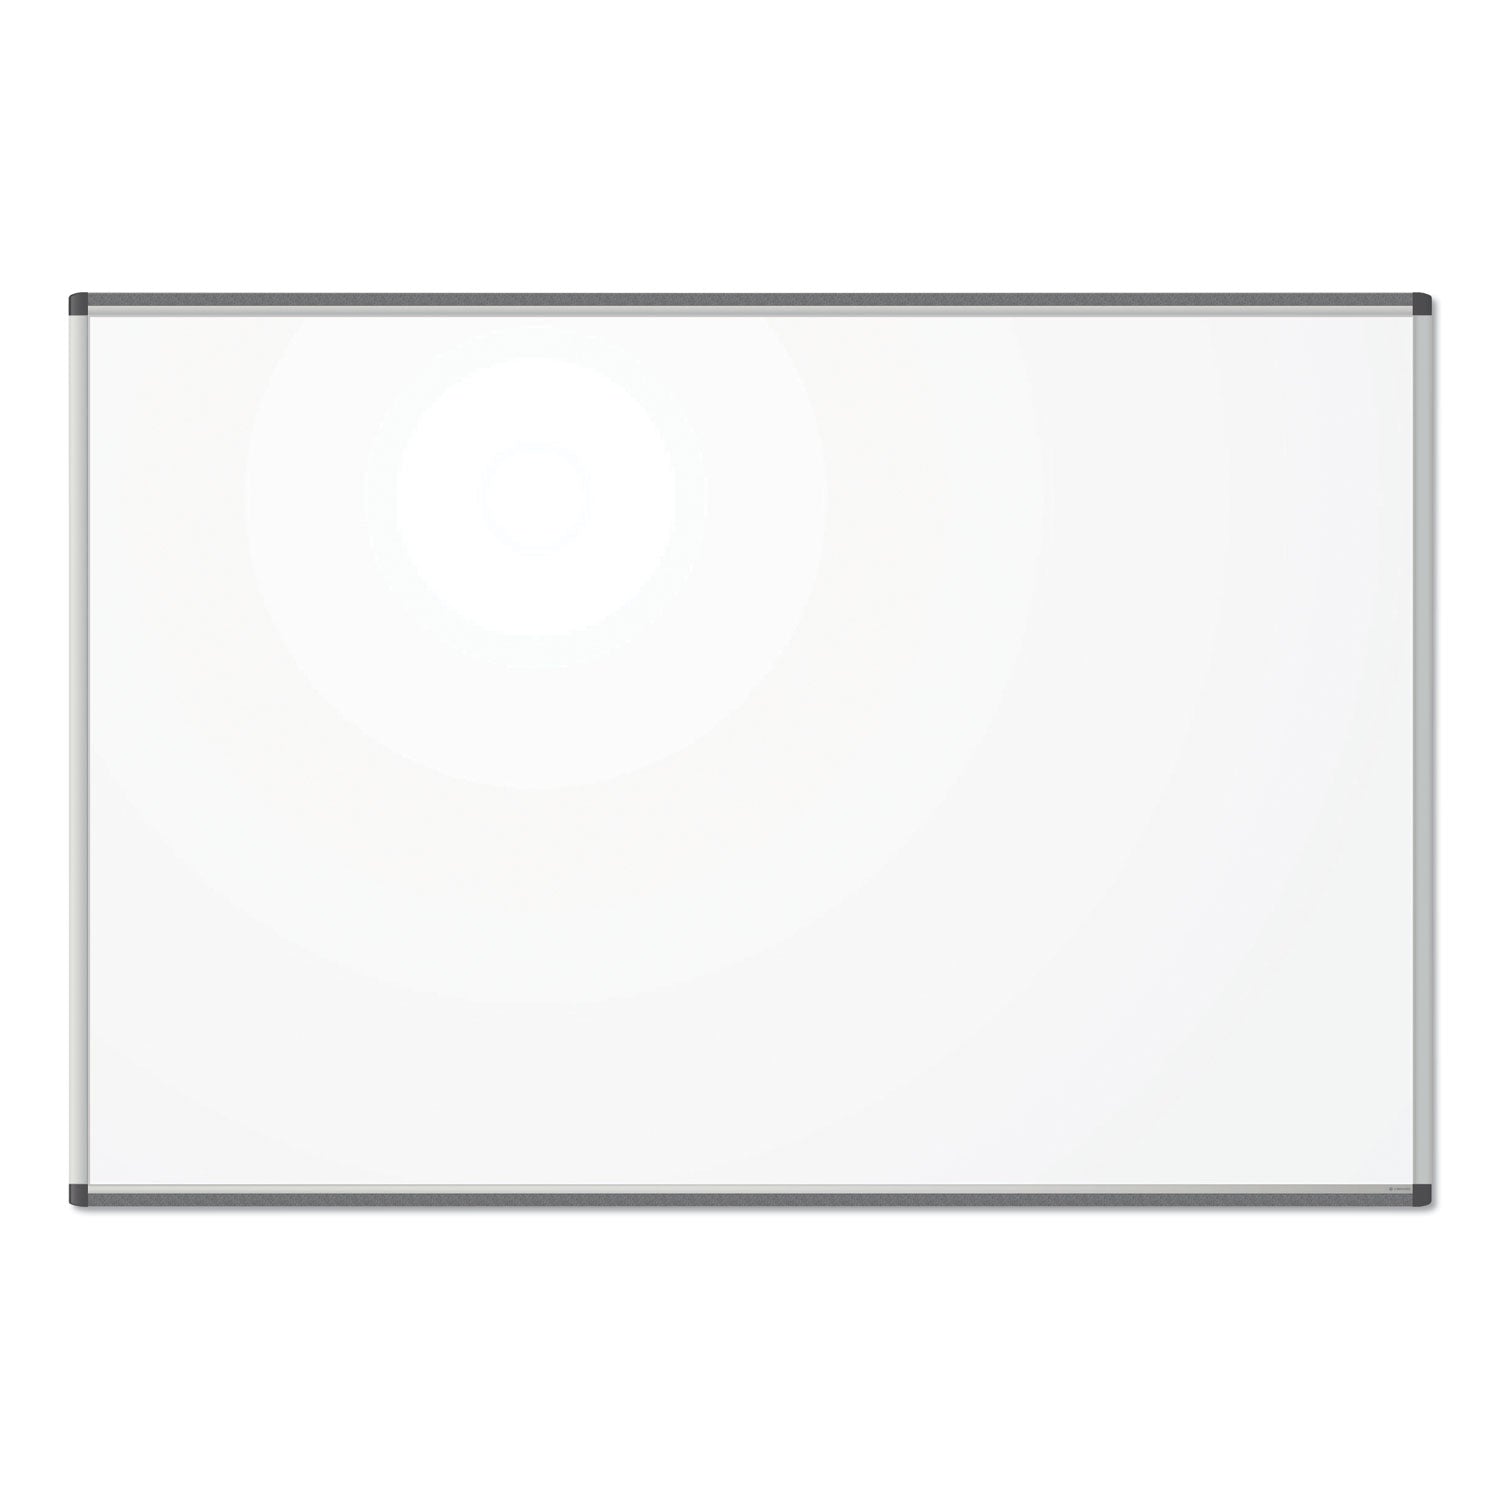 pinit-magnetic-dry-erase-board-70-x-47-white-surface-silver-aluminum-frame_ubr2808u0001 - 1